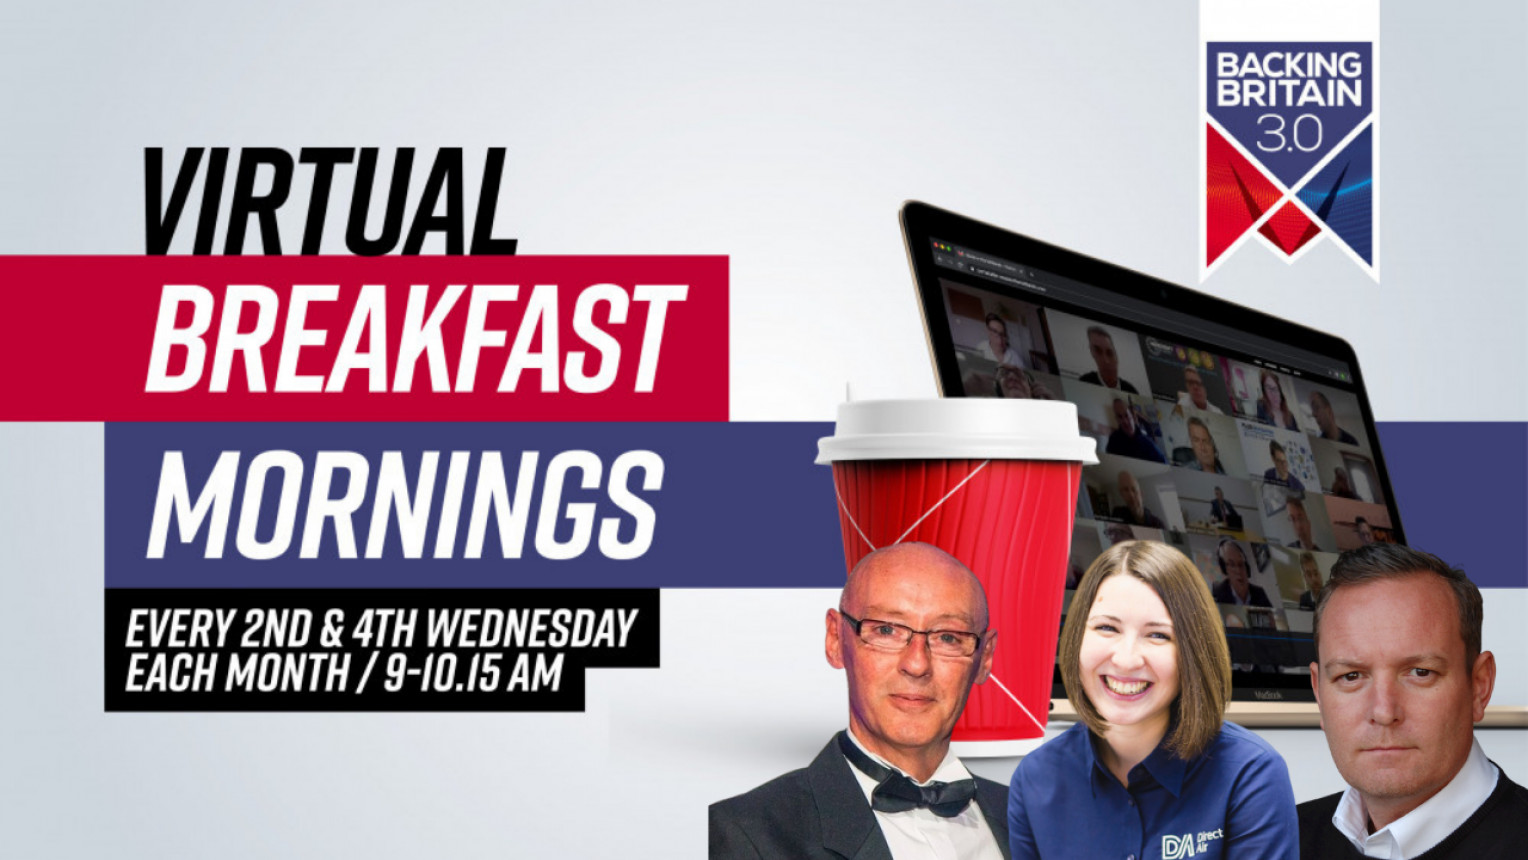 Backing Britain Virtual Breakfast Morning with Direct Air & Pipework, Gardner Denver and Specialised Laser Products